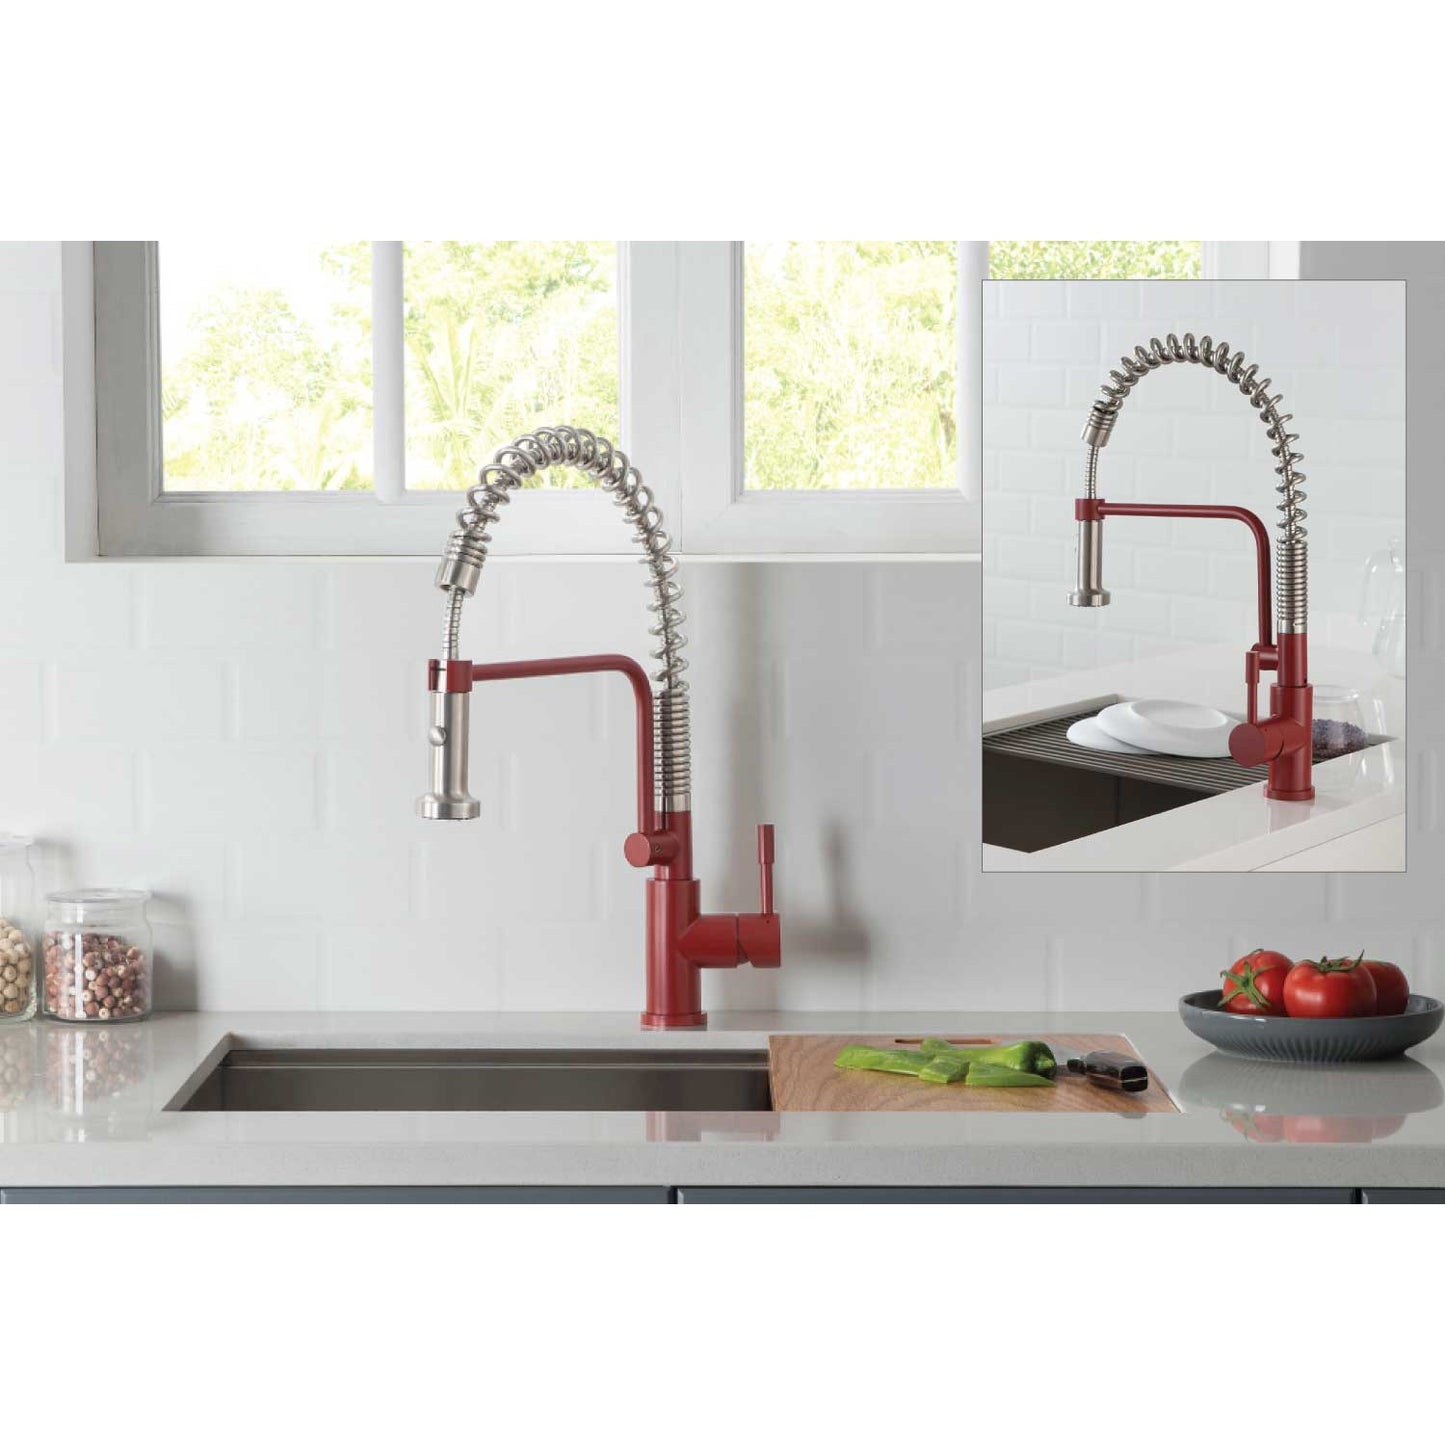 Isenberg Klassiker Caso 19" Single Hole Light Verde Semi-Professional Stainless Steel Pull-Down Kitchen Faucet With Dual Function Sprayer